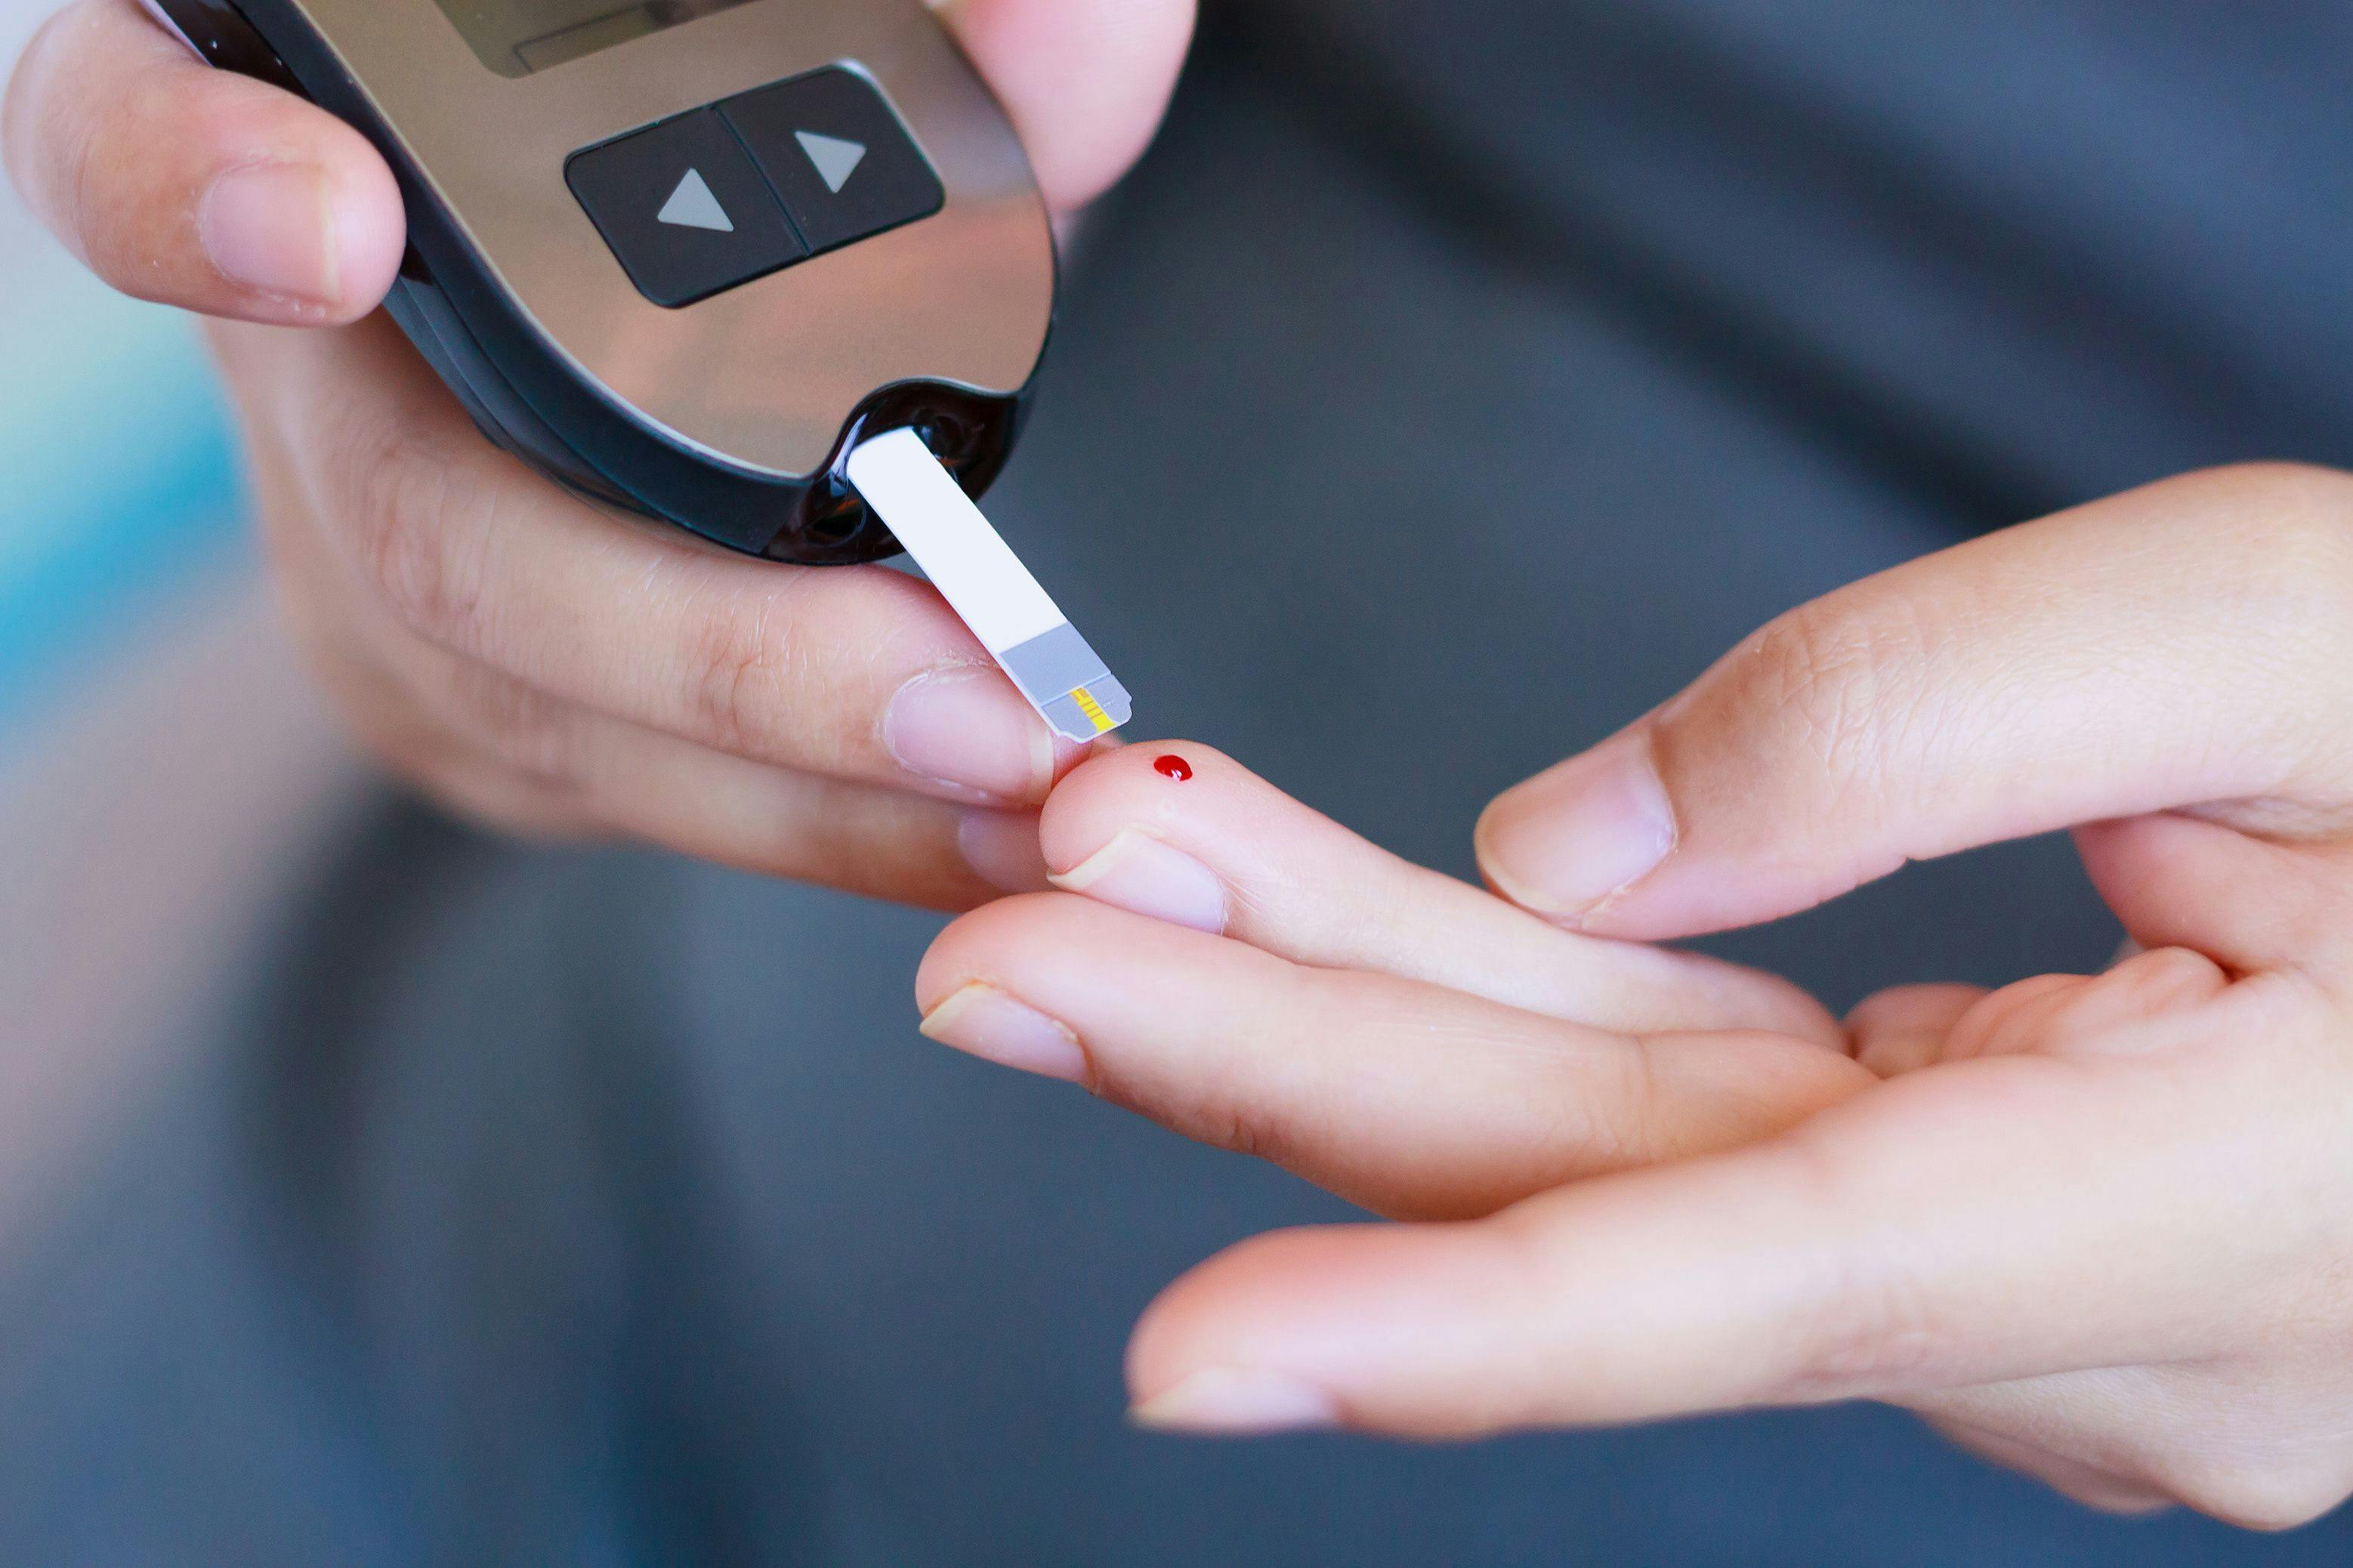 Prediabetes Associated with Increased Risk of Major Cardiovascular Events, ACC.21 Study Finds